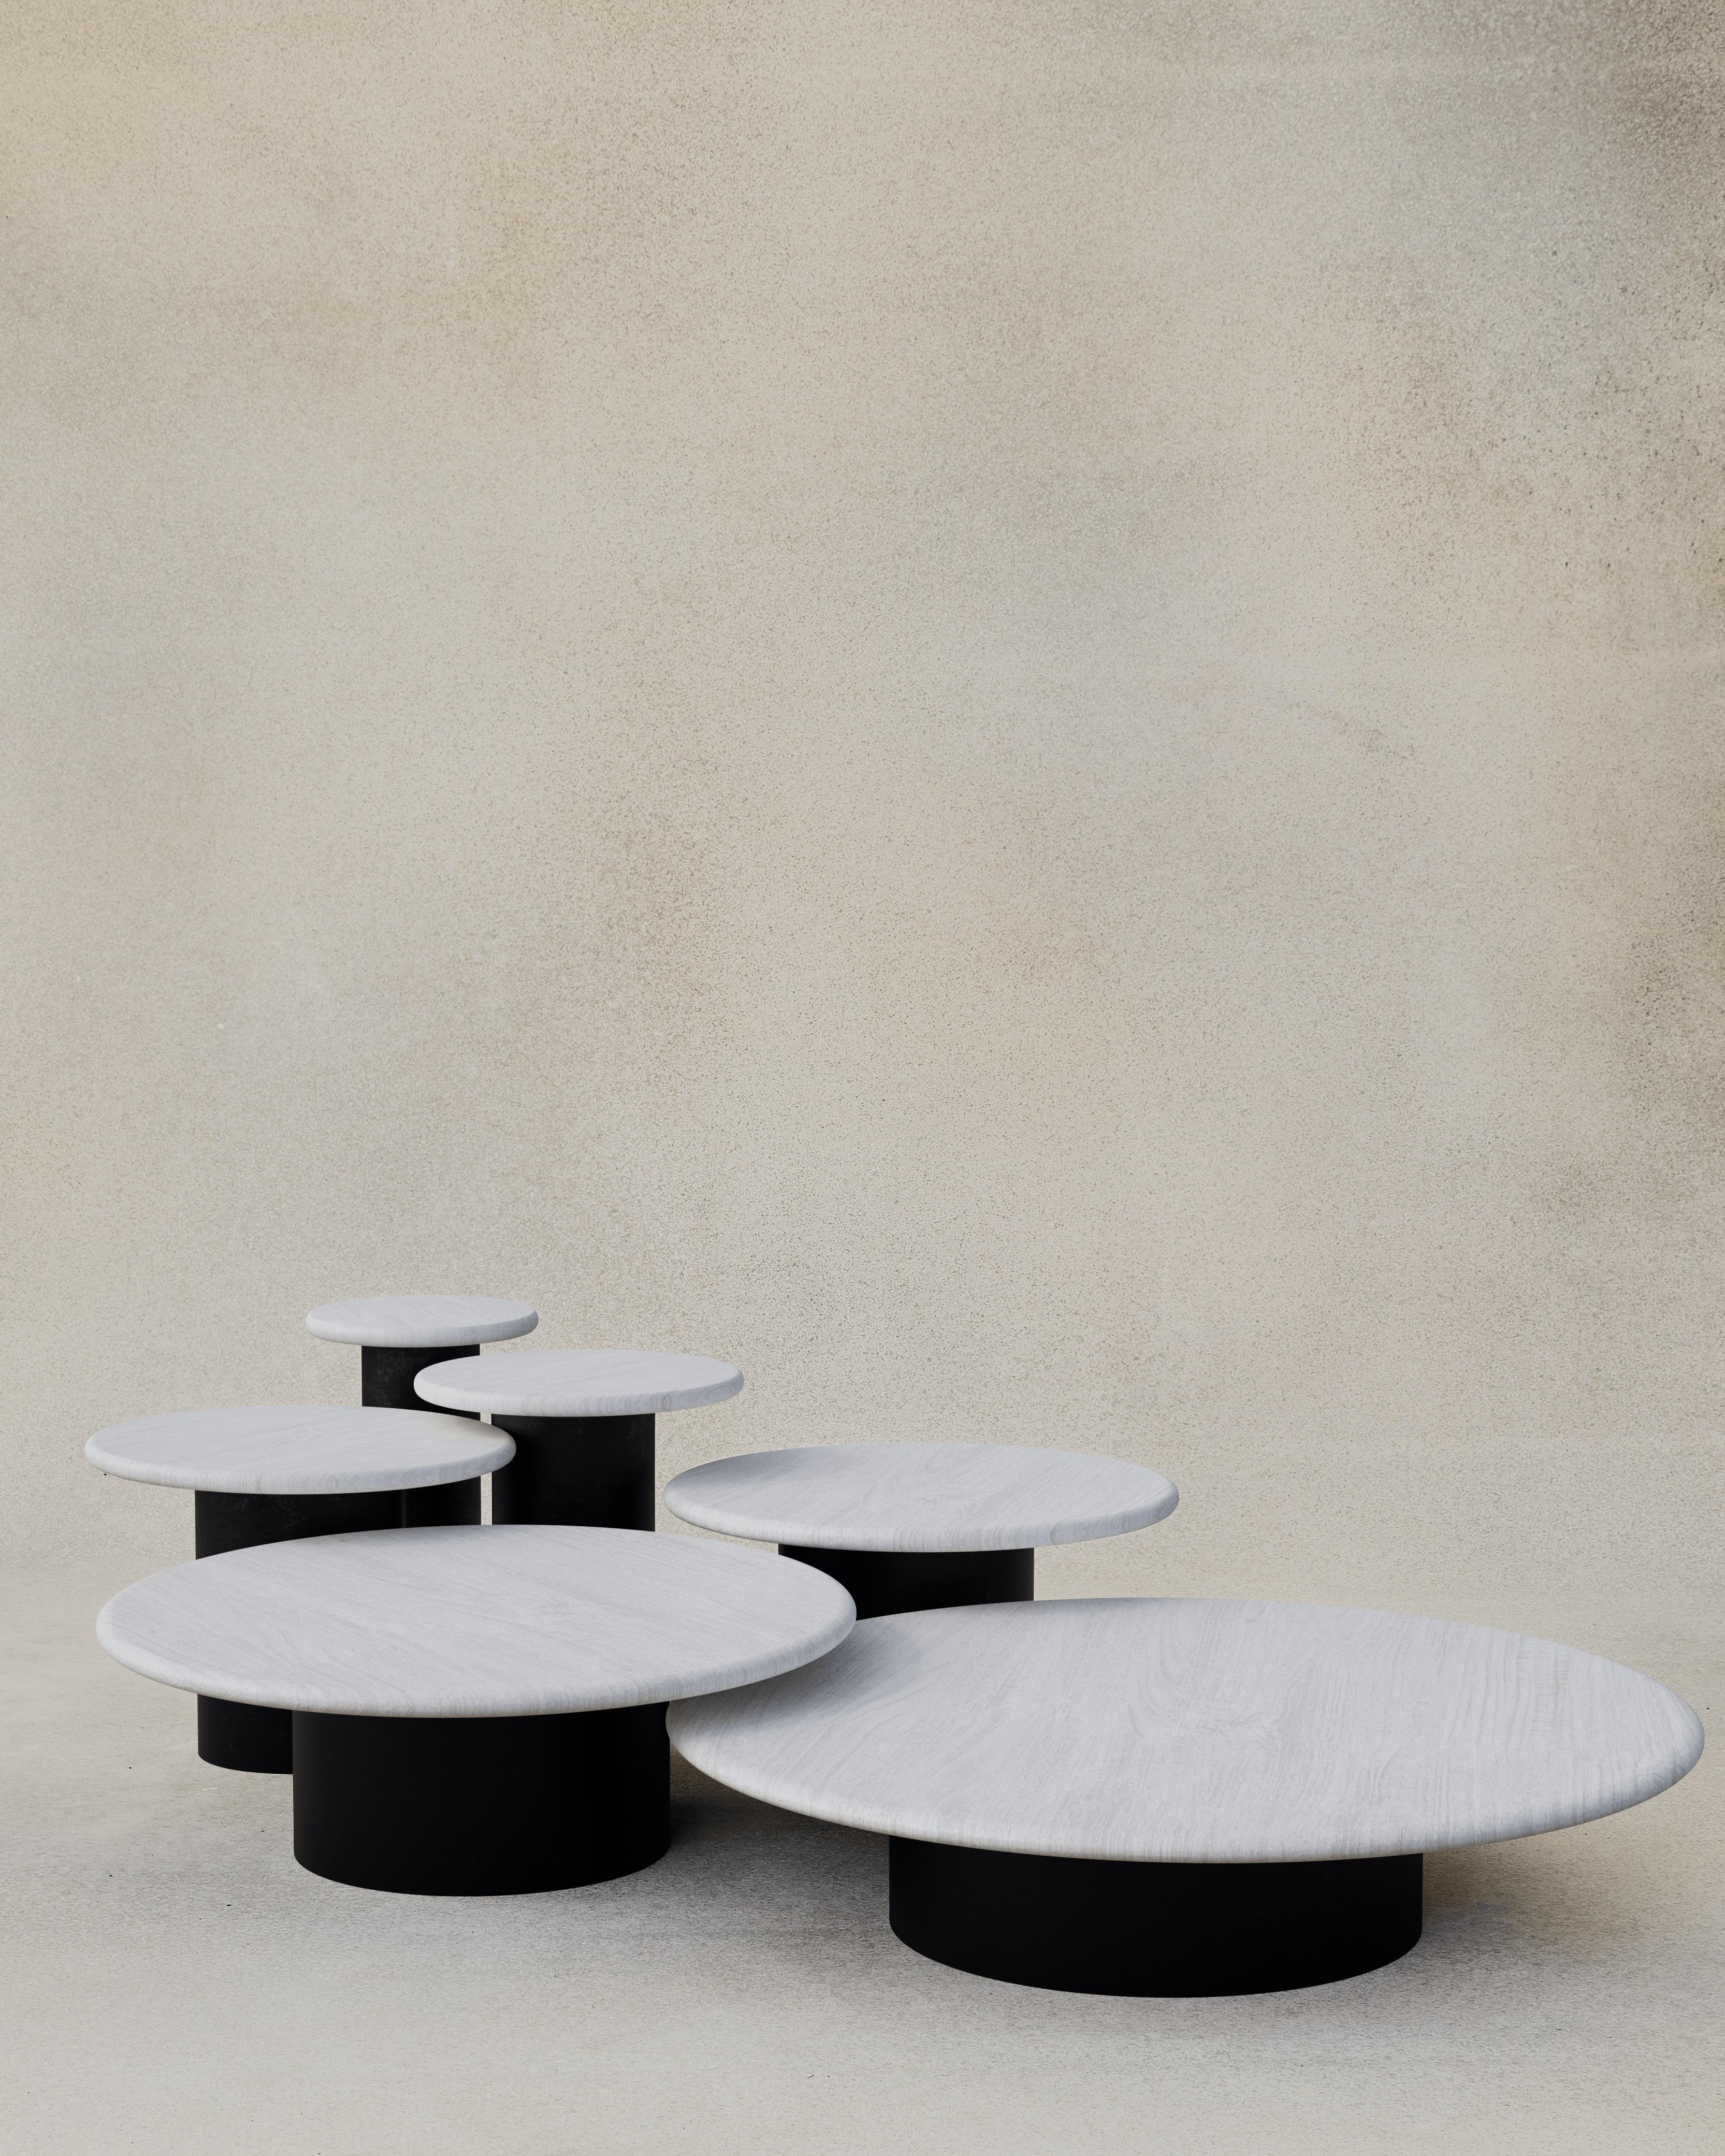 With their circular profiles, varying proportions and potential to be nested, these versatile tables evoke the pattern of raindrops in a POOL of water when placed together.

Bought as a full set of 300, 400, 500, 600, 800 and 1000, we add a 10%